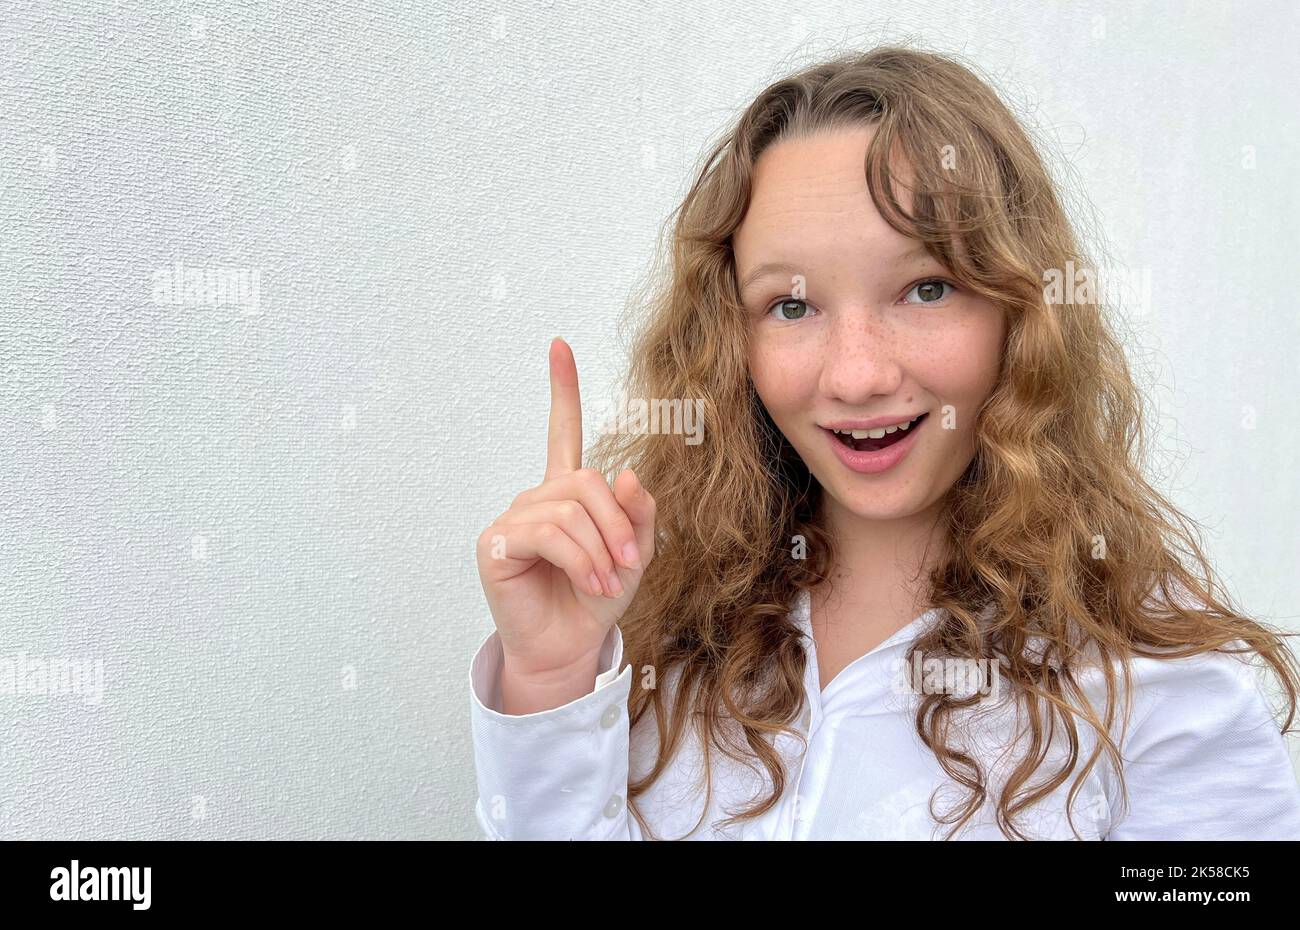 a girl on a white background in a white blouse, fair-haired, shows different cheerful emotions, she makes faces, she laughs happily, she ruffles her hair and shows her tongue. High quality photo Stock Photo